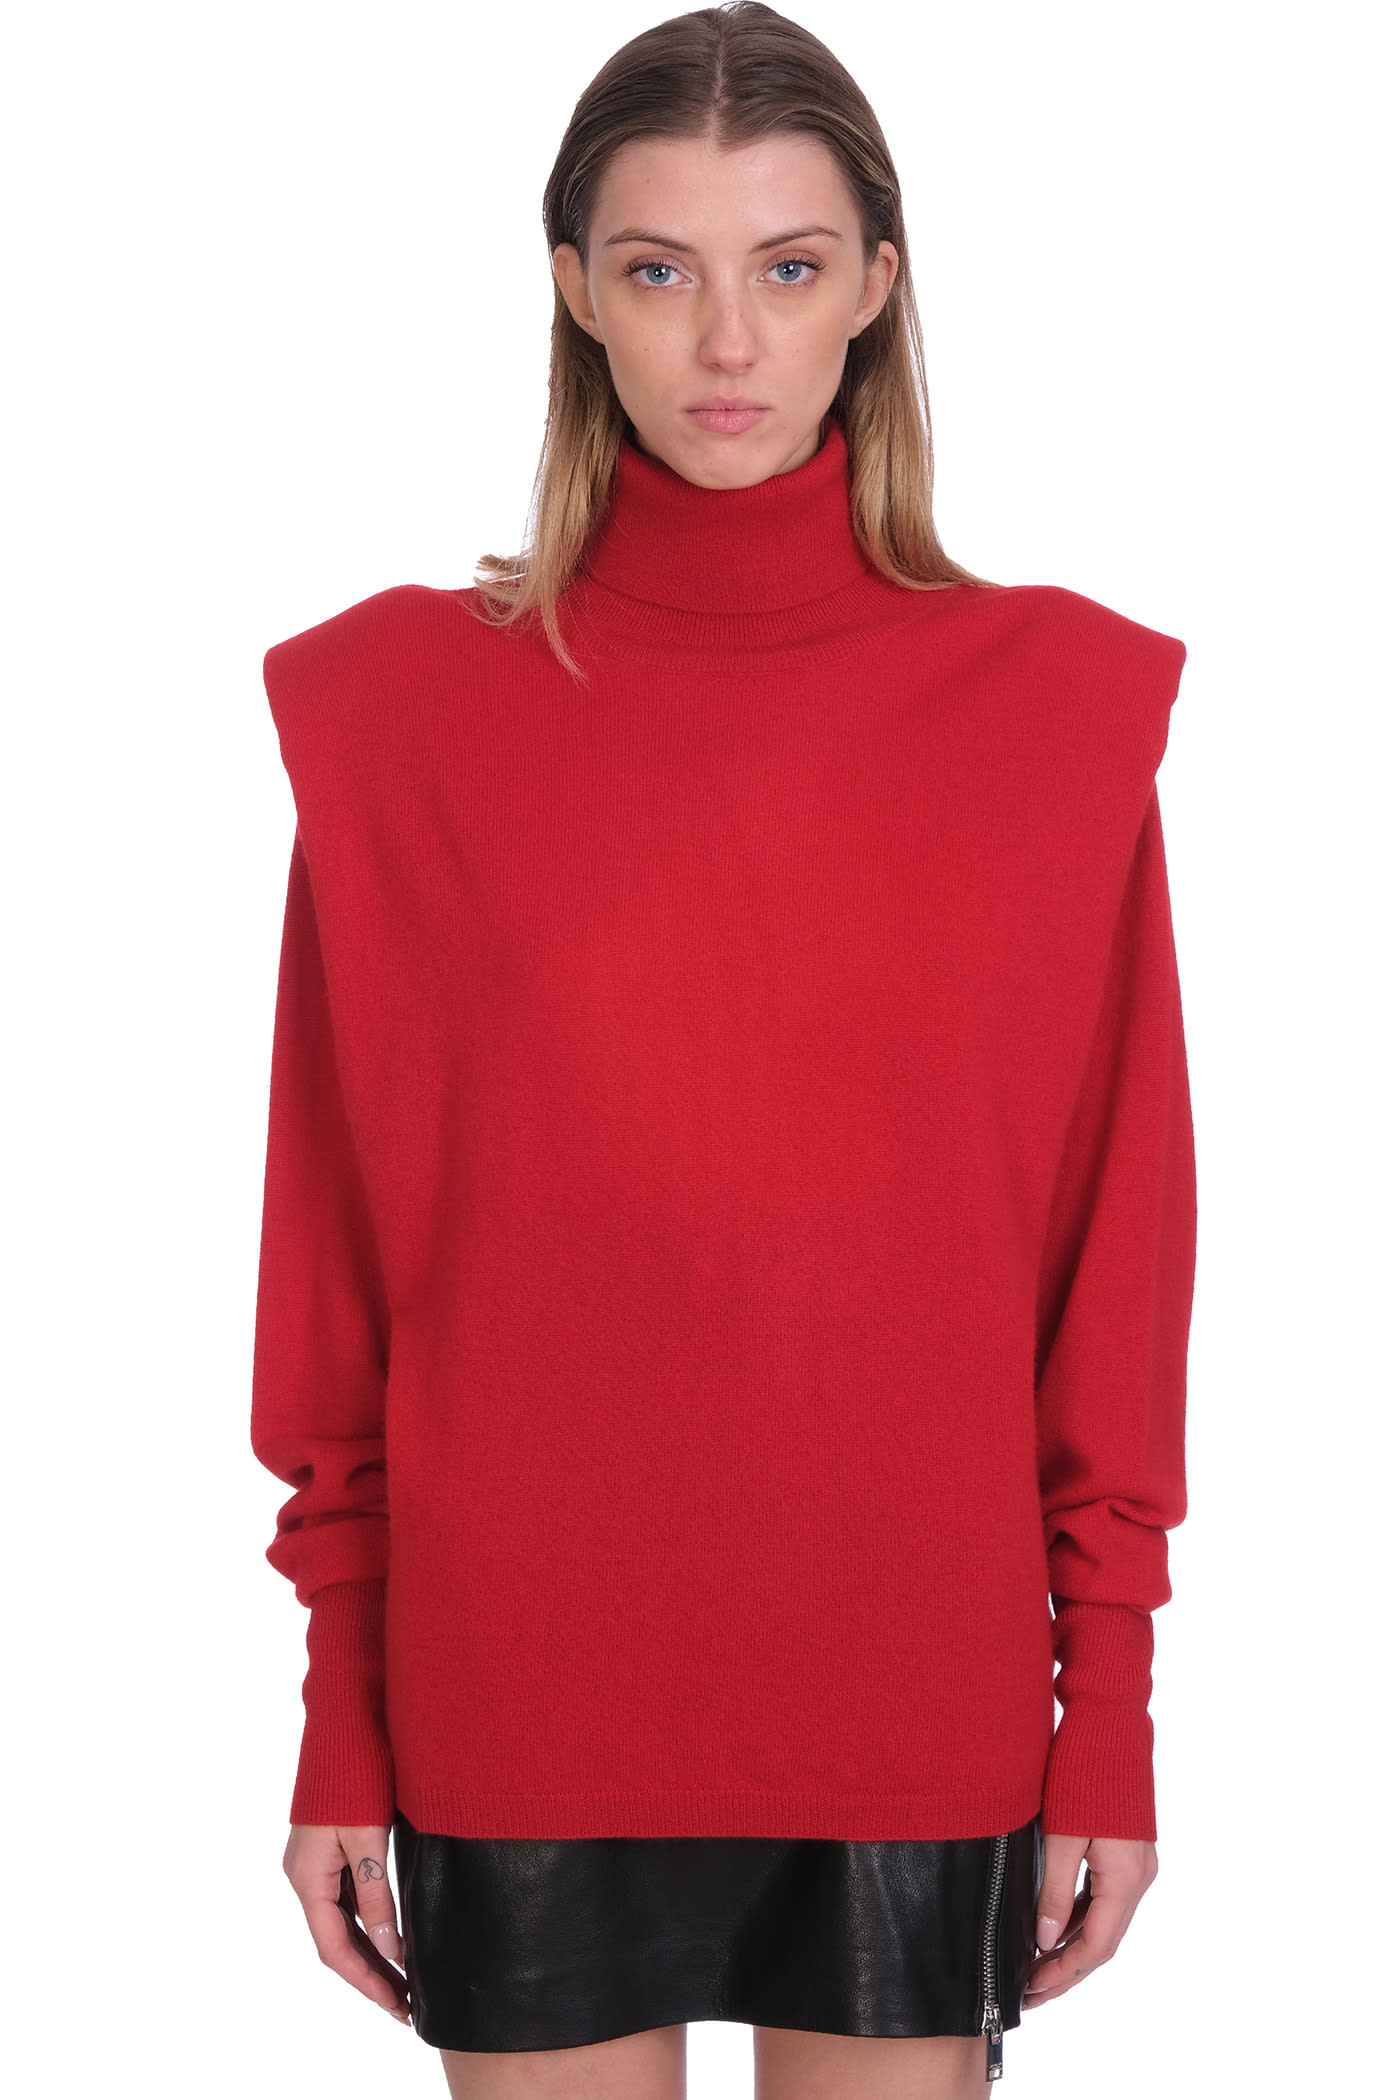 Jacob Lee Knitwear In Red Cashmere